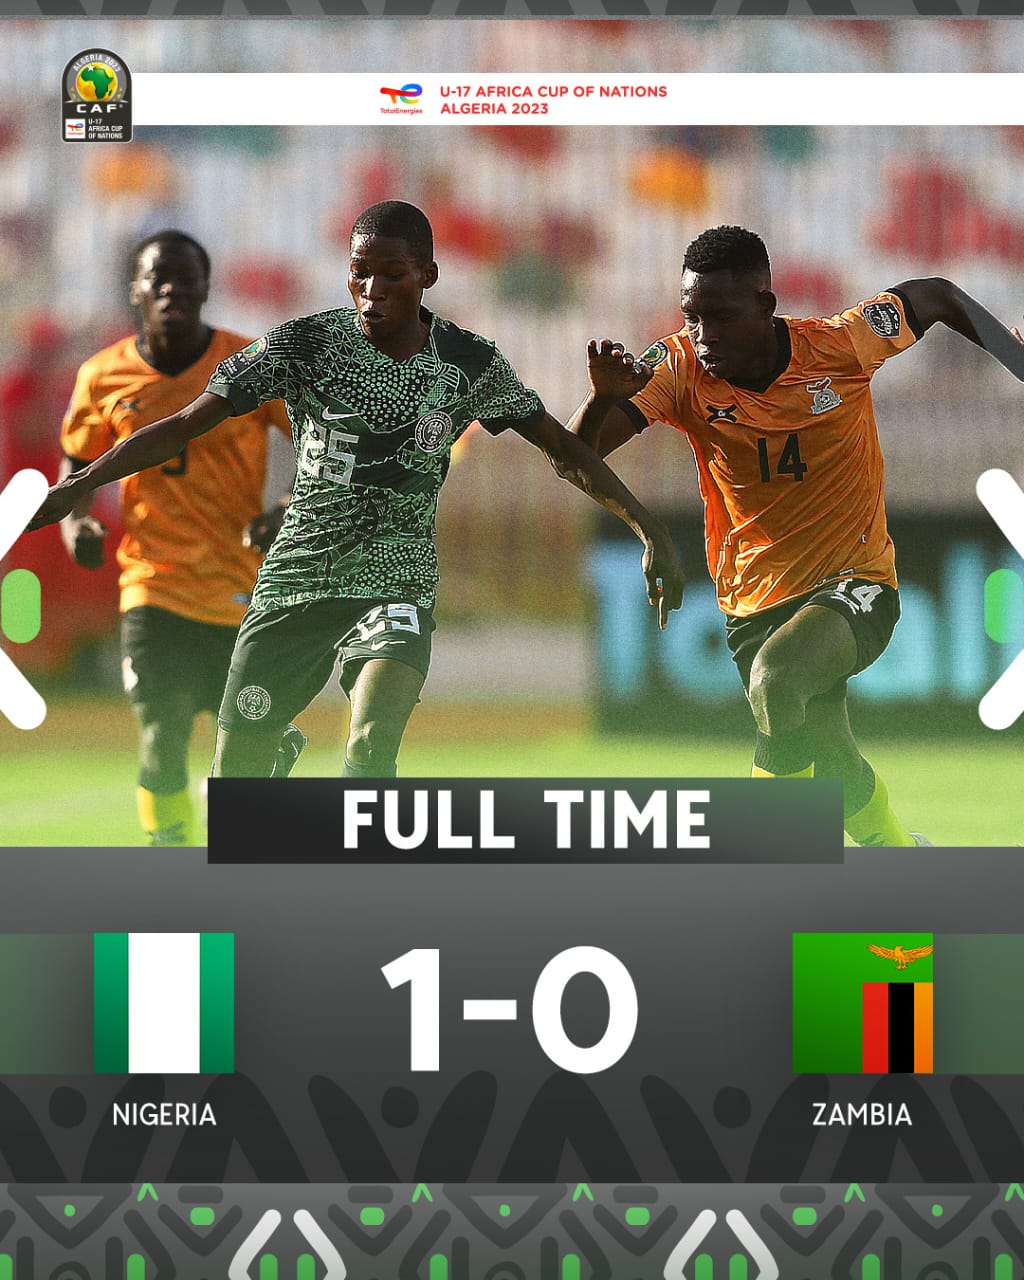 AFCON U-17: Nigeria's Golden Eaglets beat Zambia in opening game